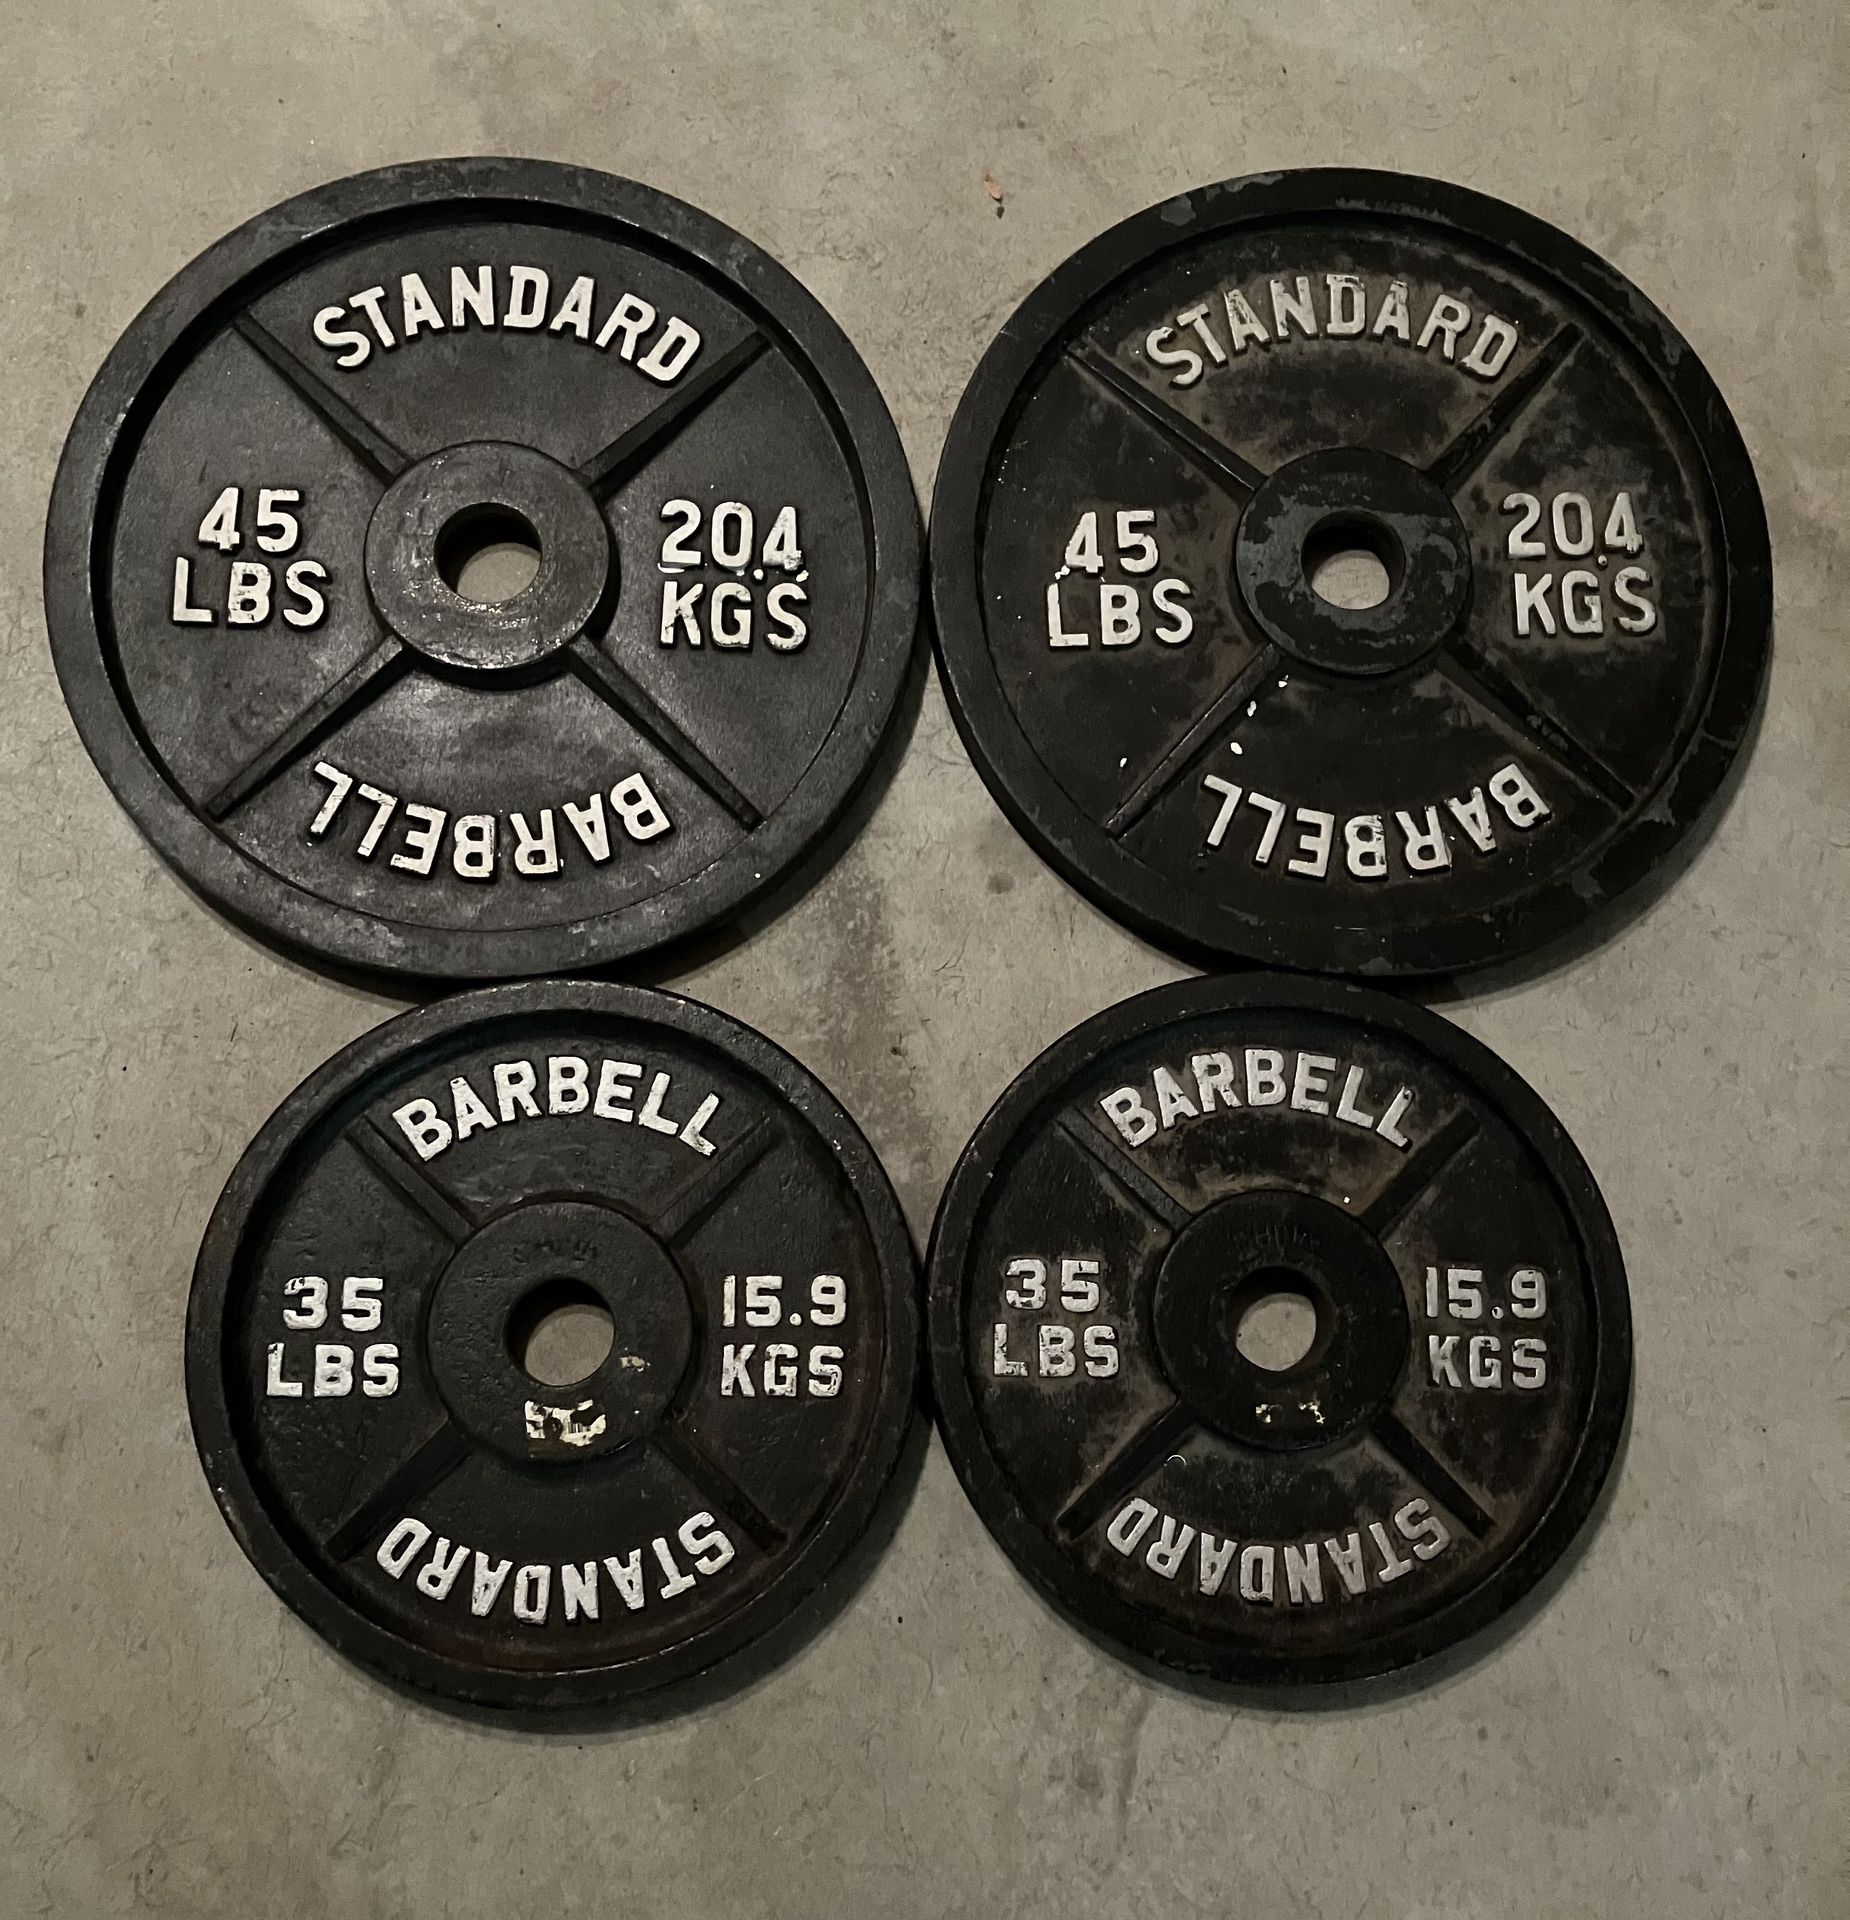 160lbs Olympic 2" weight plates weights plate 45b 35lb 45 35 Ib Ibs 45lbs 35lbs for Barbell Bar workout bench Press